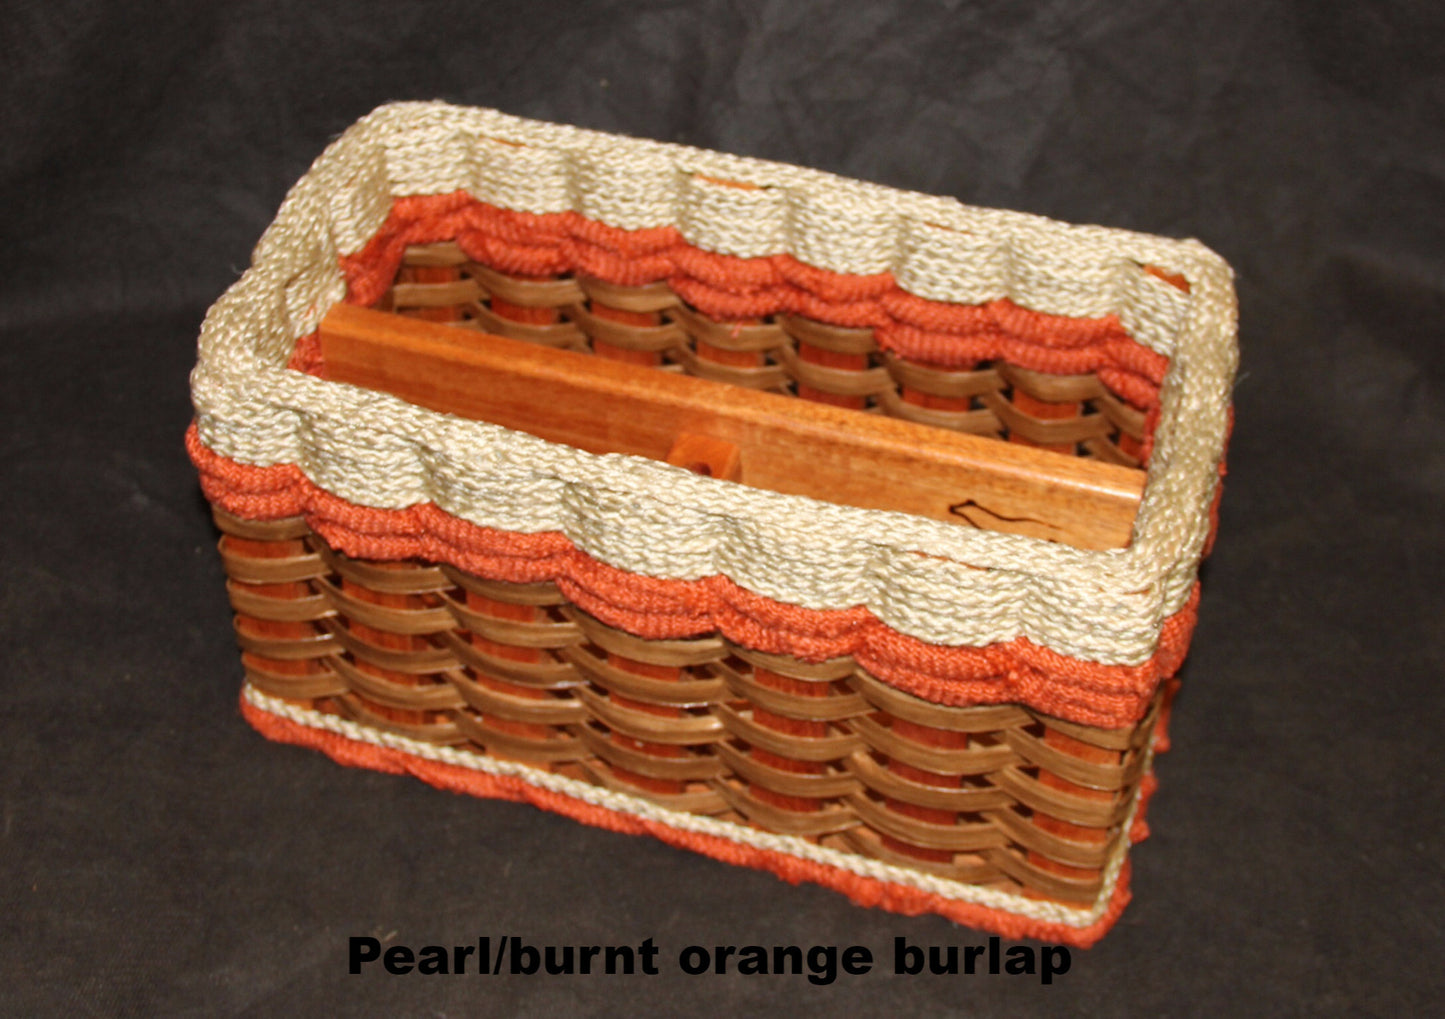 Mail Organizer Basket-Shabby Chic Collection